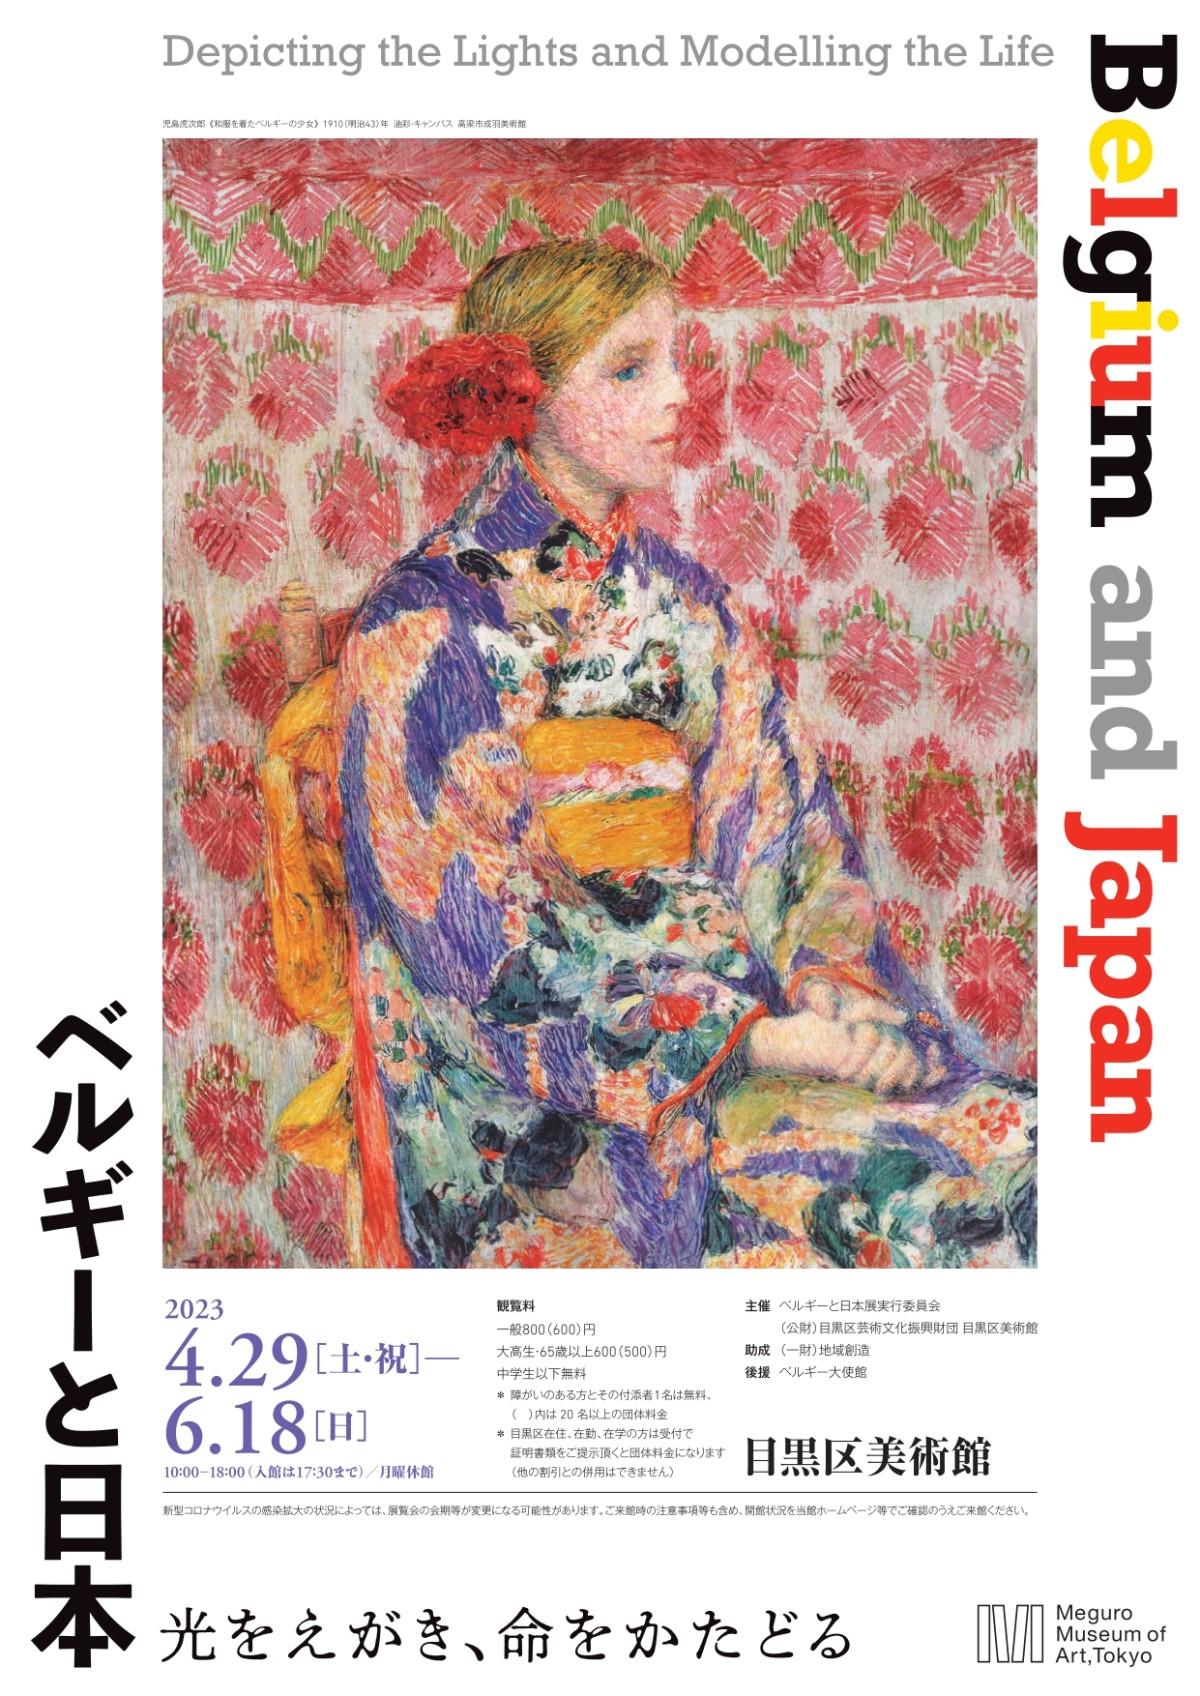 Belgium and Japanー Depicting the Lights and Modeling the Life （Meguro Museum of Art） Art Beat